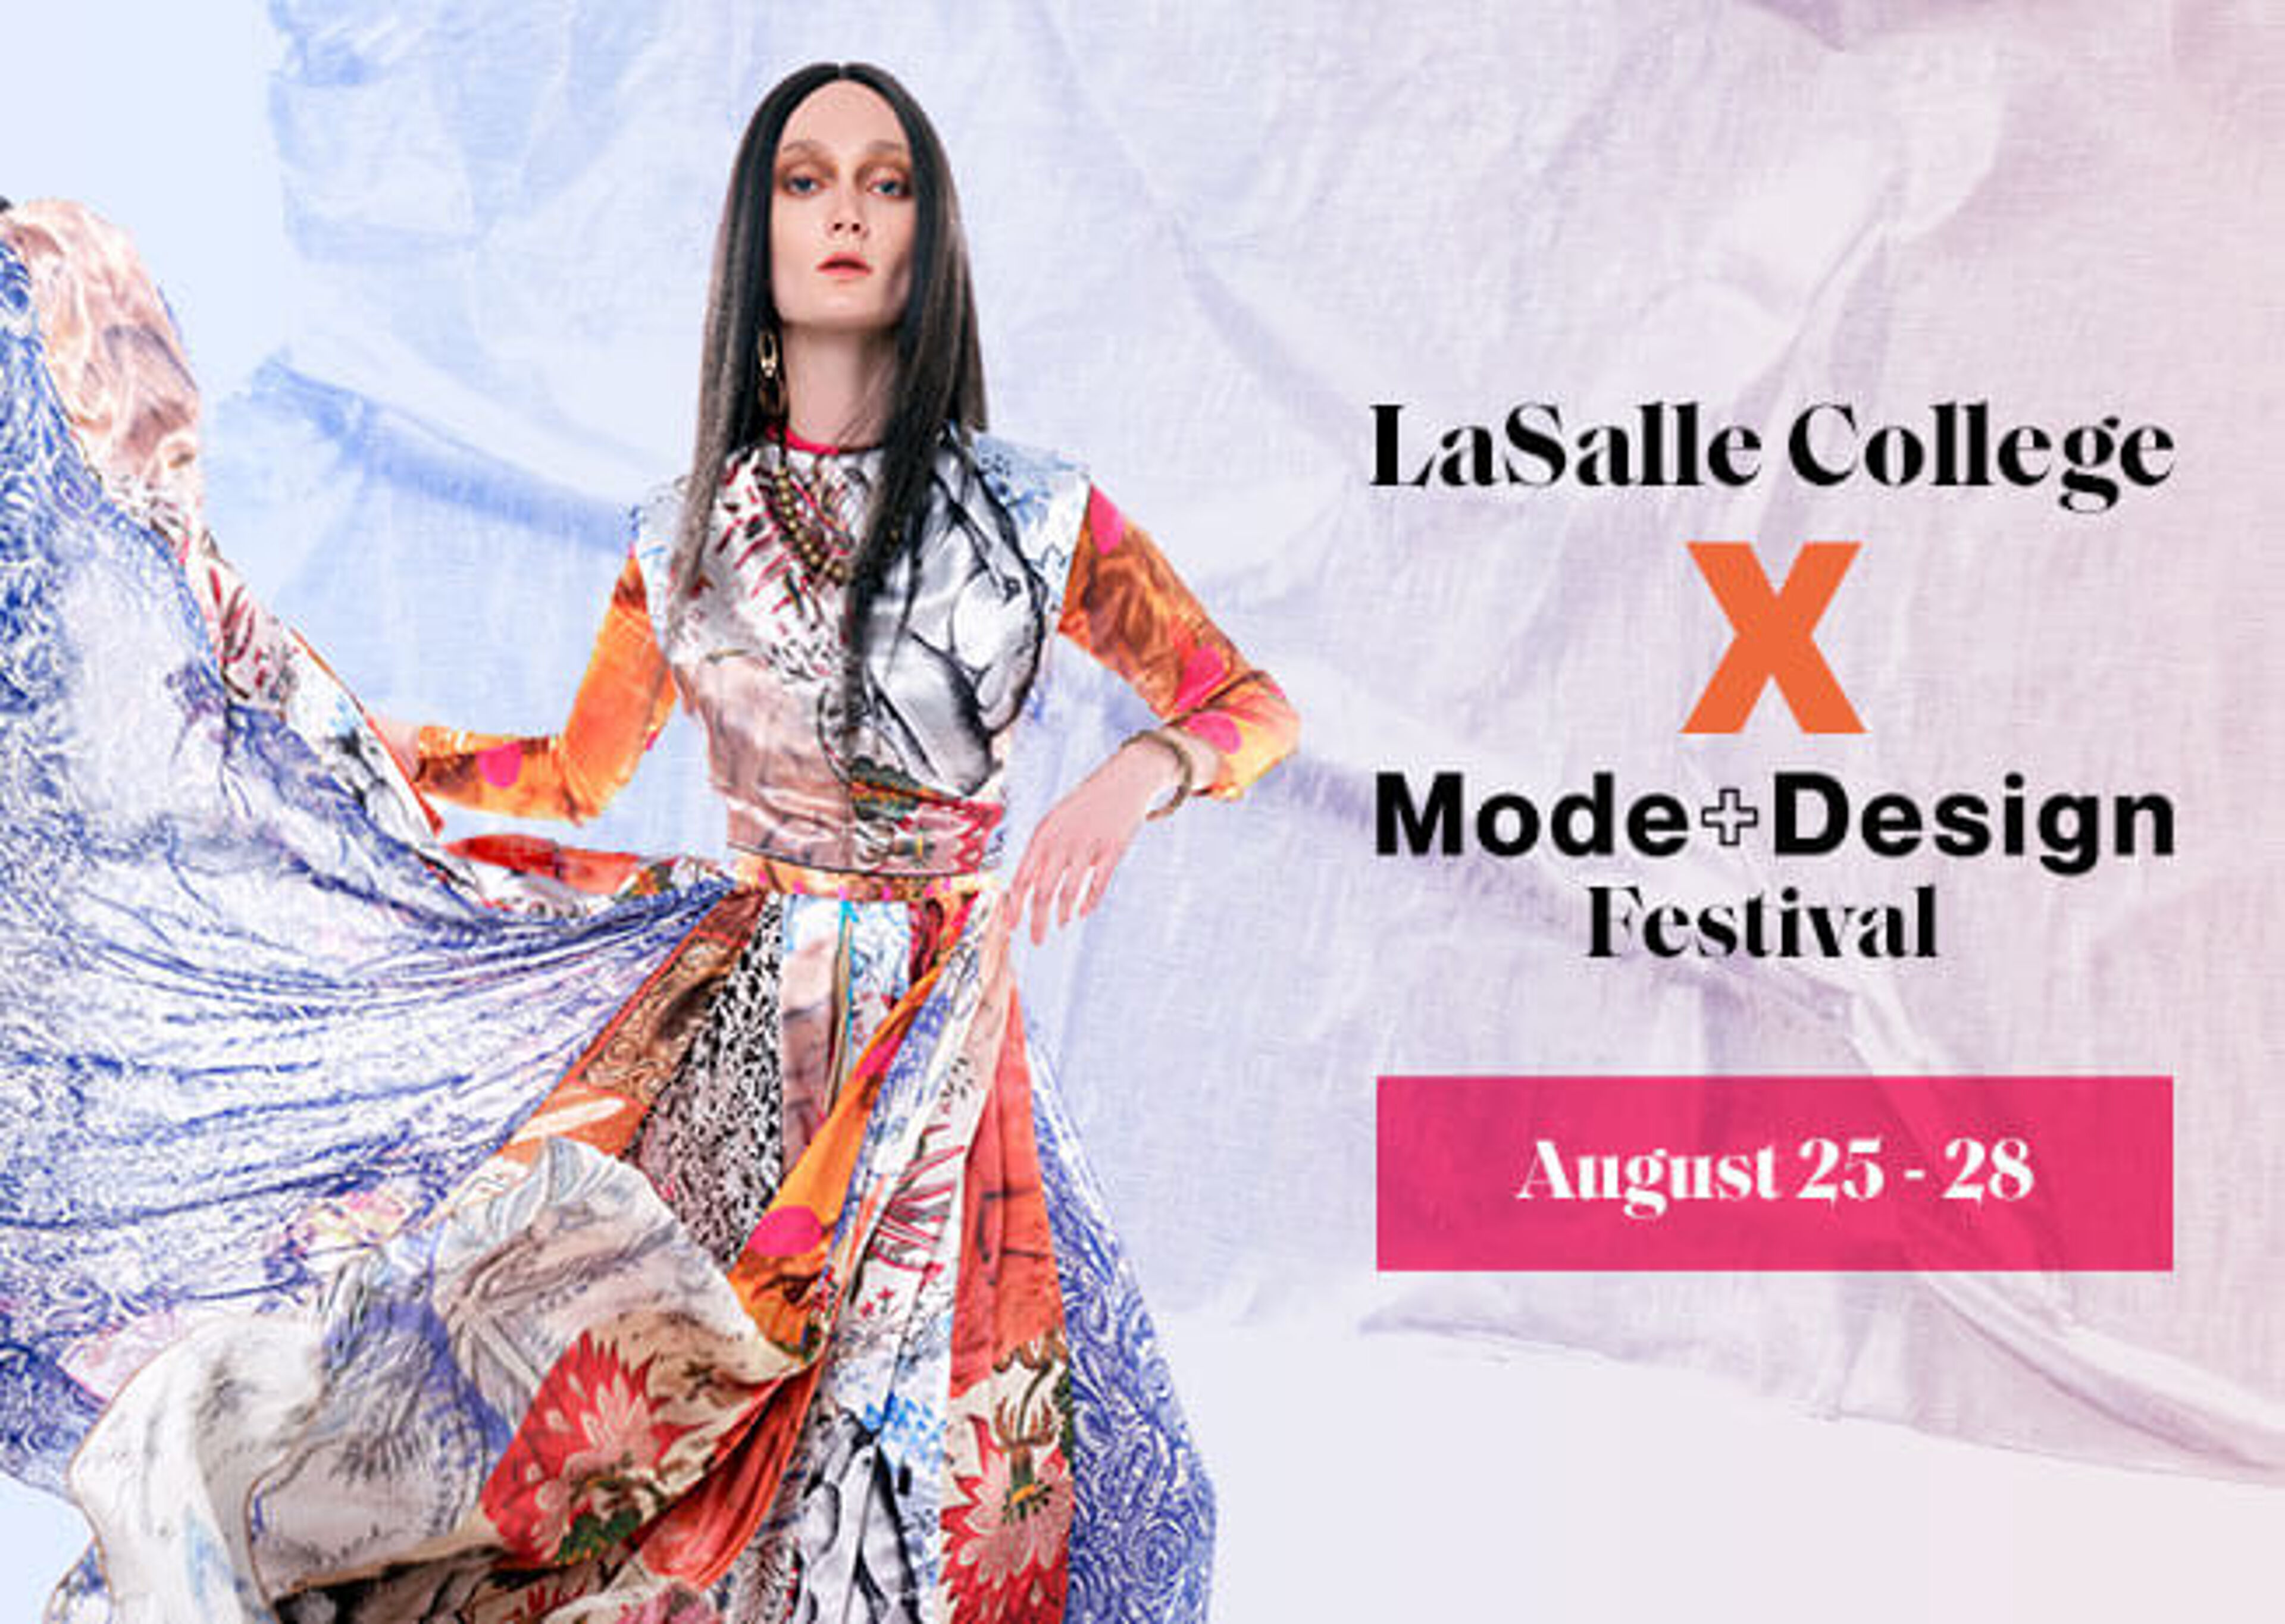  LaSalle College partners with Mode+Design Festival for an event celebrating fashion, scheduled for August 25-28.